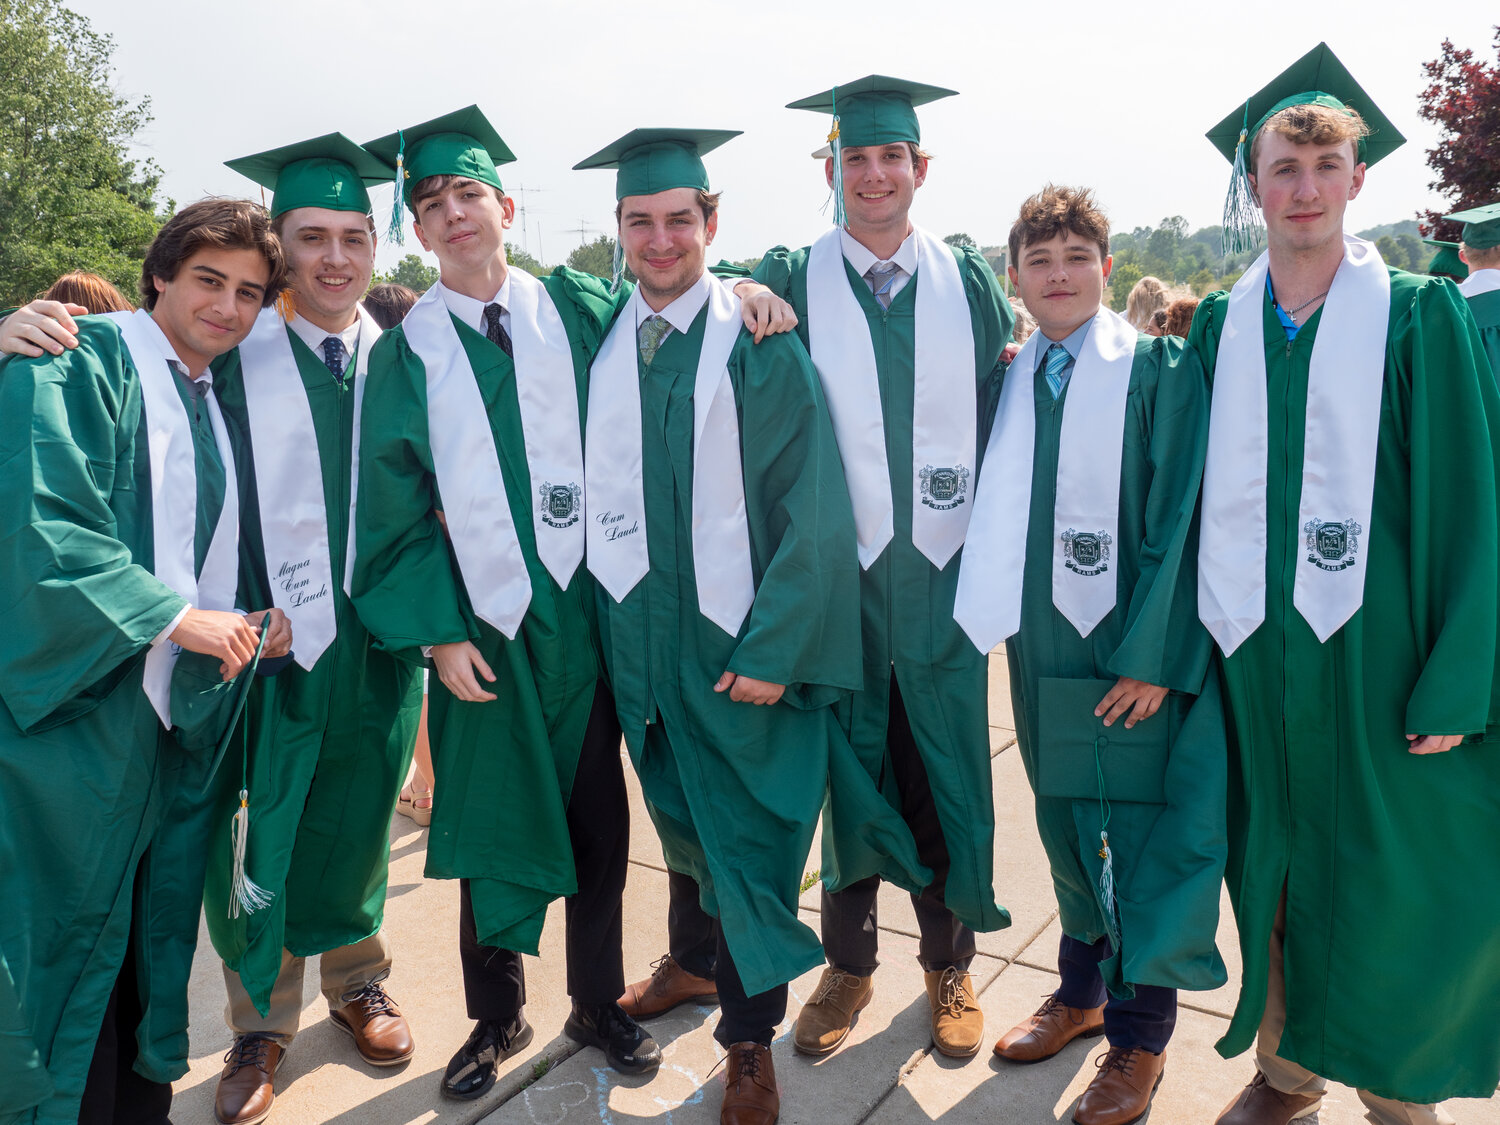 Members of the Pennridge High School Class of 2023 attend their graduation ceremony Tuesday at Stabler Arena.